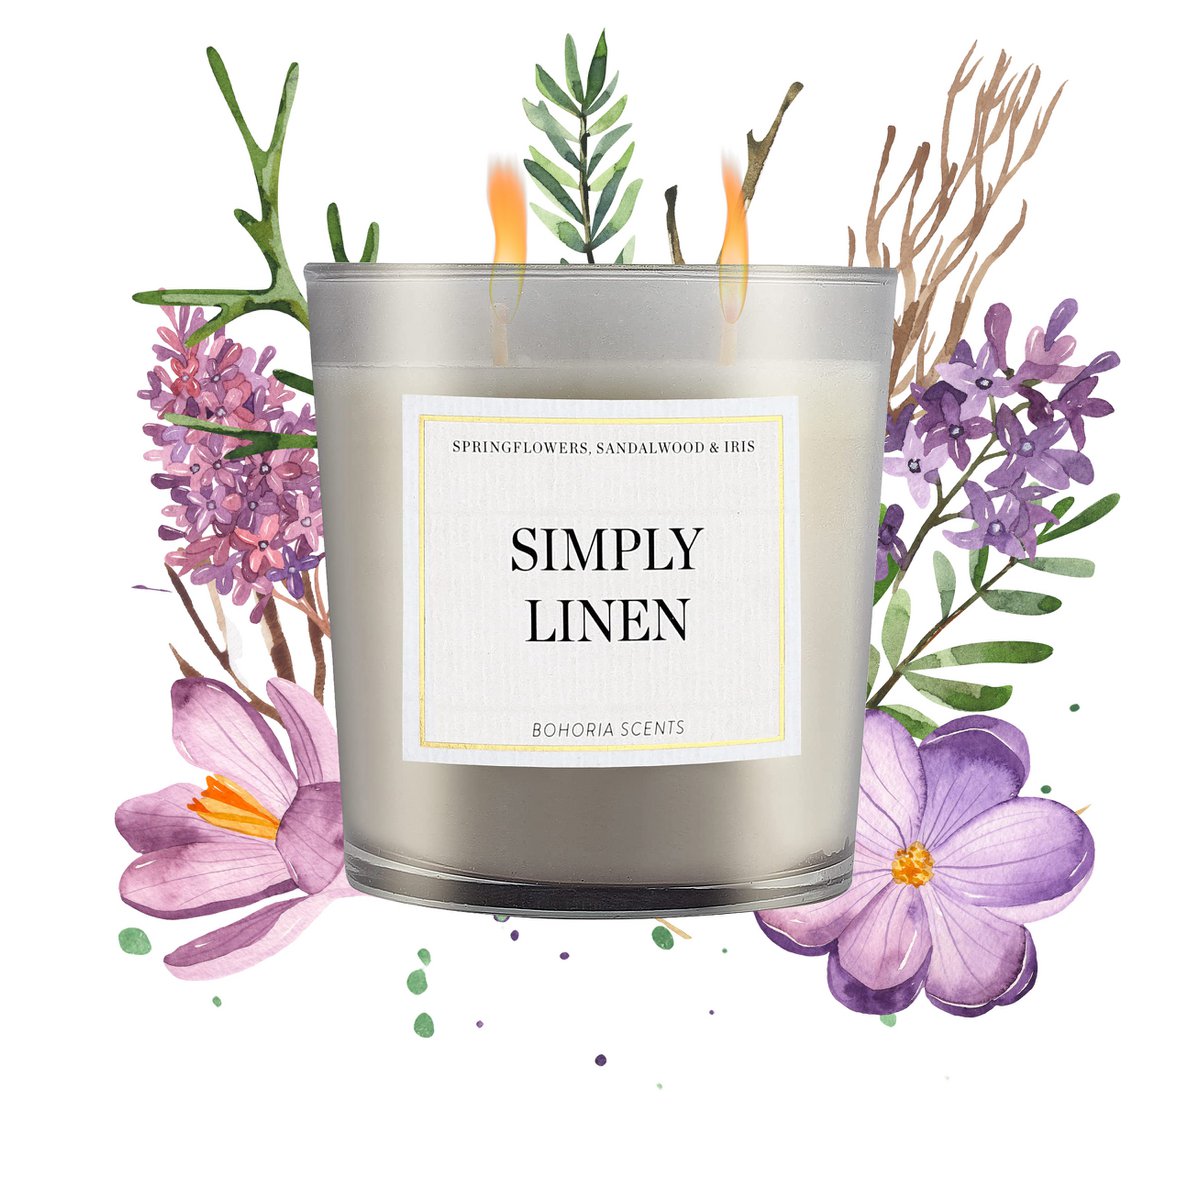 Bohoria Scented Candle Simply Linen